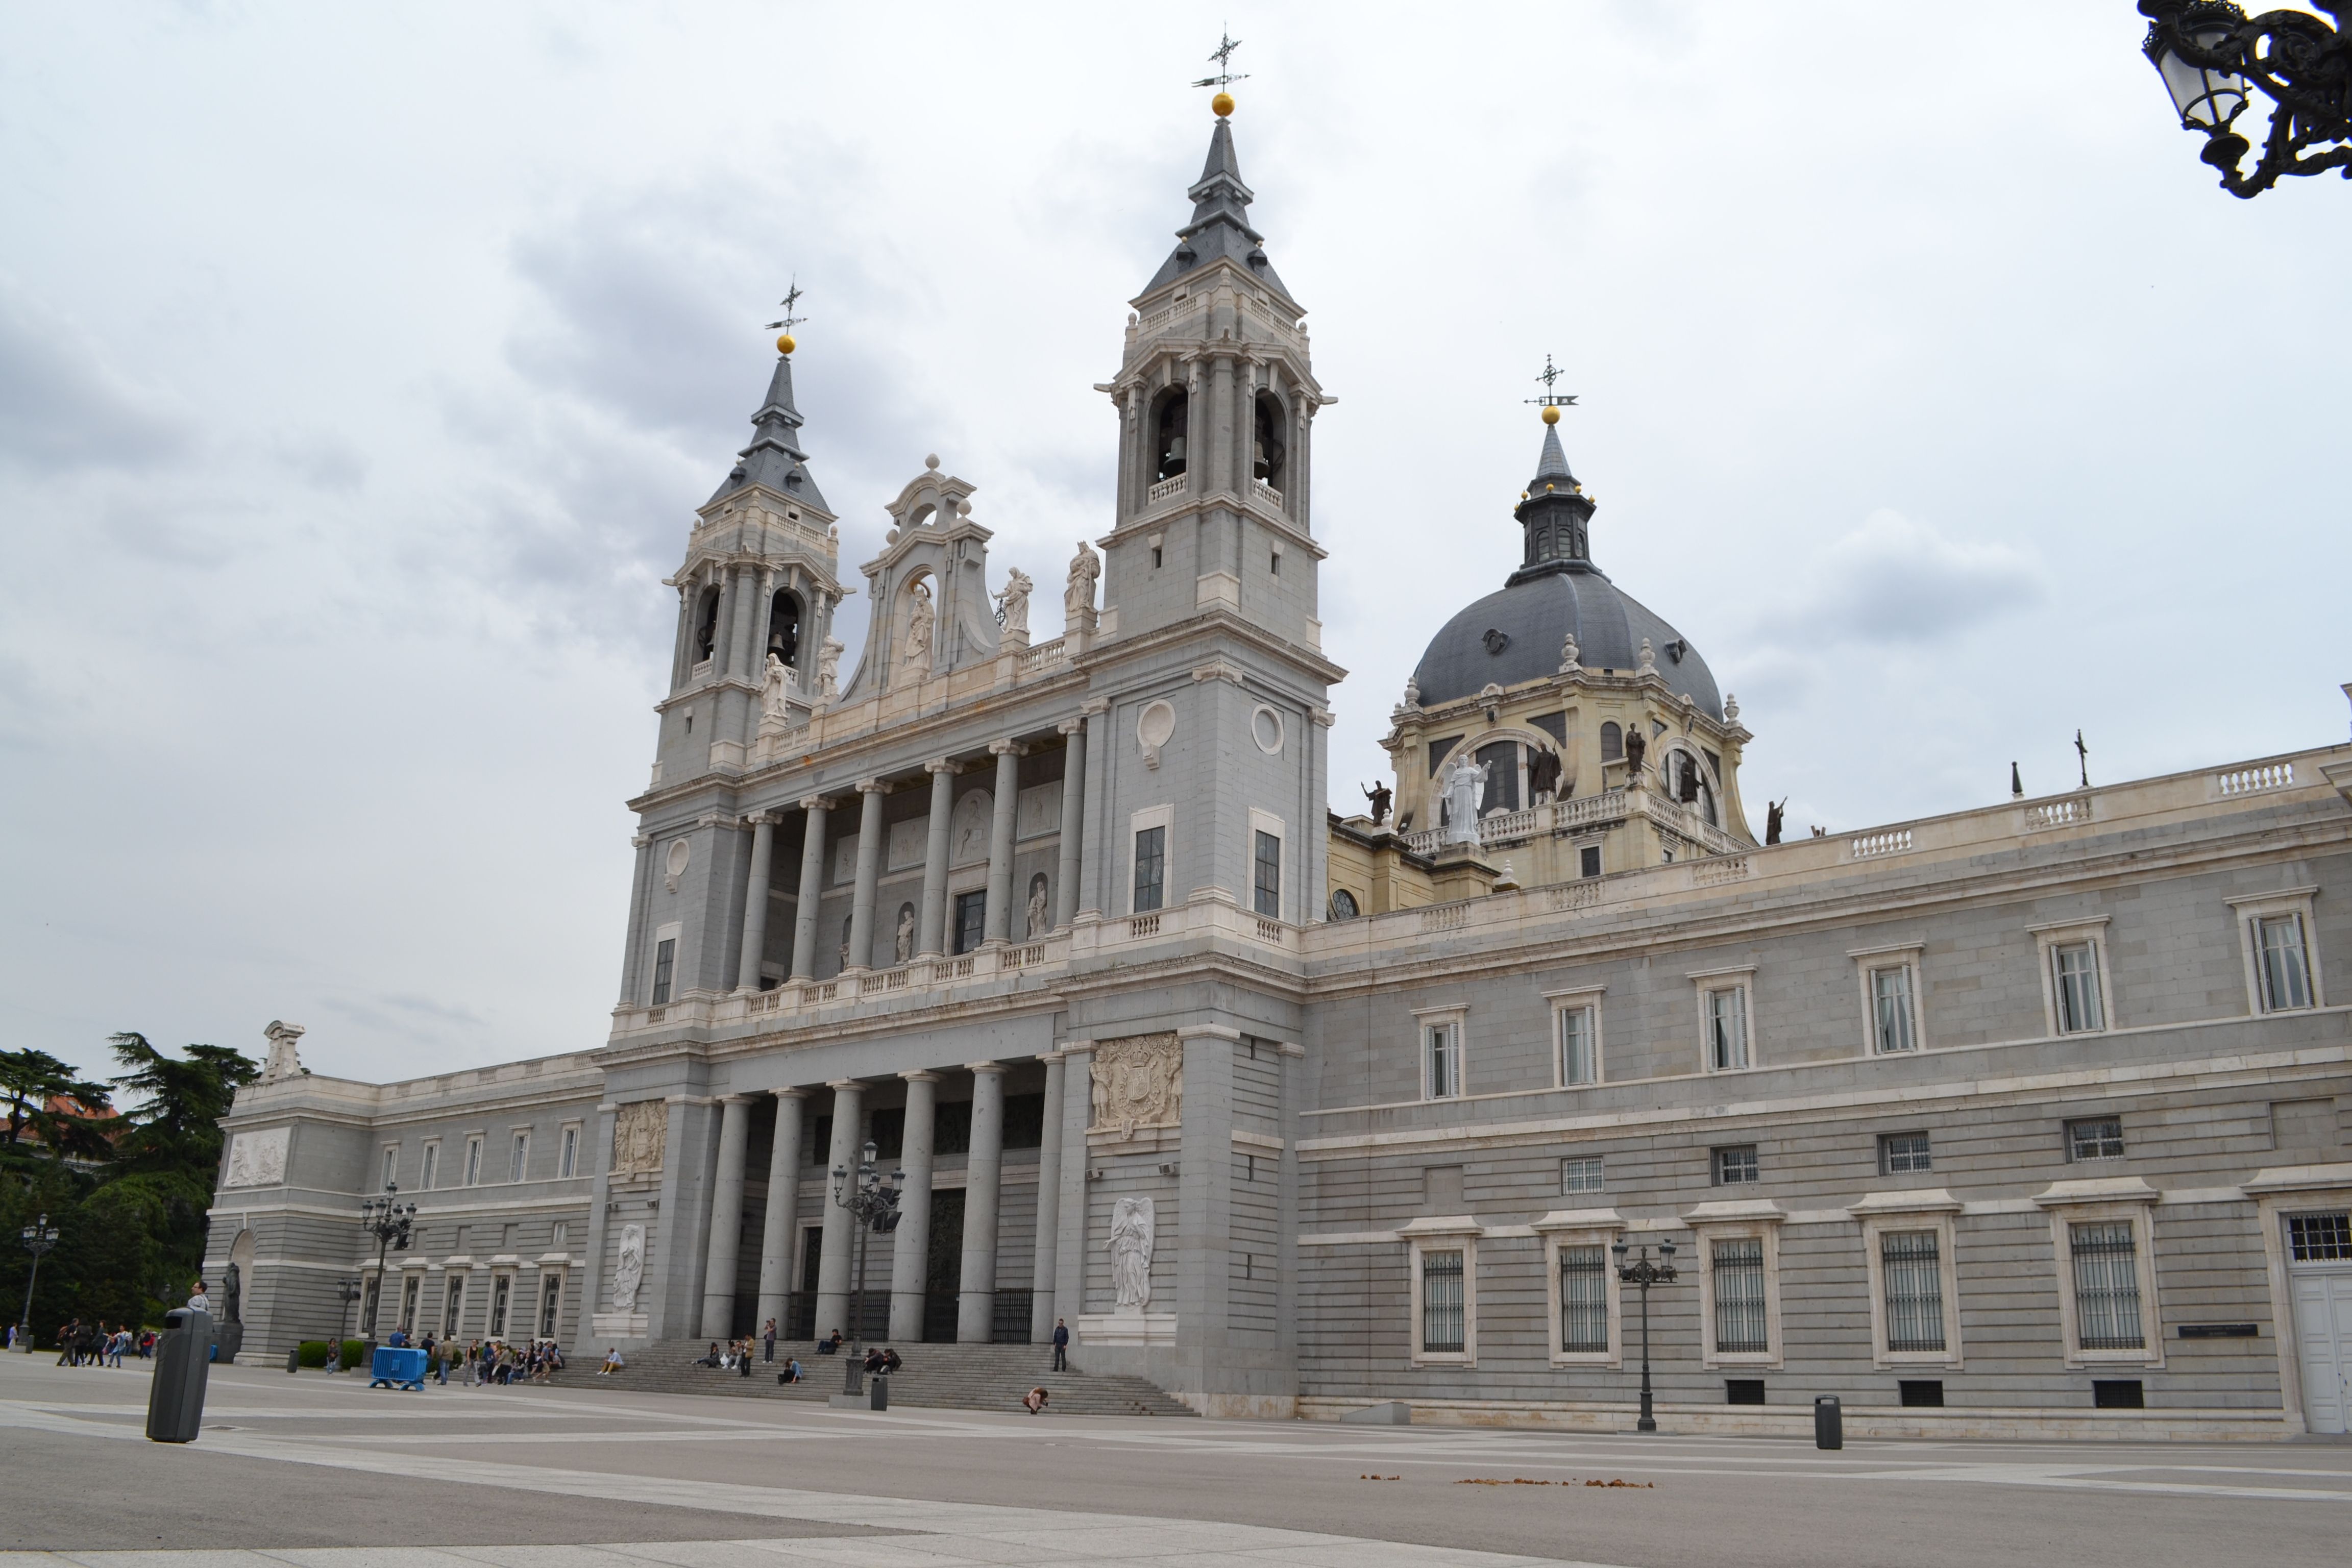 religious, almudena cathedral, cathedrals